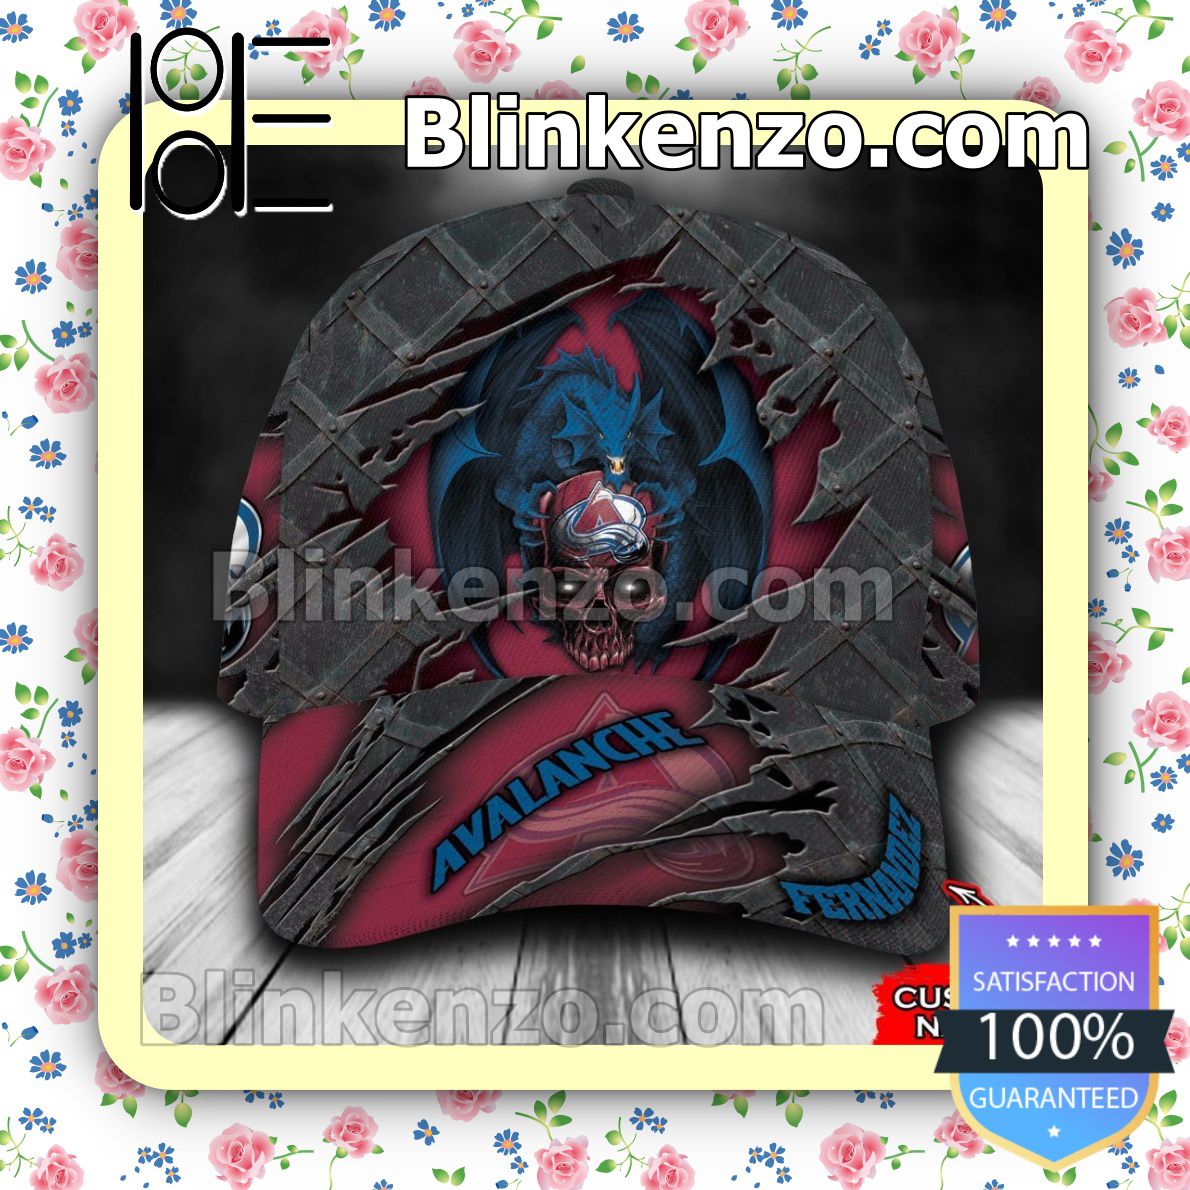 Colorado Avalanche Dragon Crack 3D NHL Classic Hat Caps Gift For Men 😍
 
💰 Only $29.99
 
🌐 Buy Now: 

 #blinkenzo #tagolife #tagowear #Bucket_Hat_Women #Colorado_Avalanche #Gifts_For_Husband #NHL #Scrub_Hat #Trucker_Hat_Men 